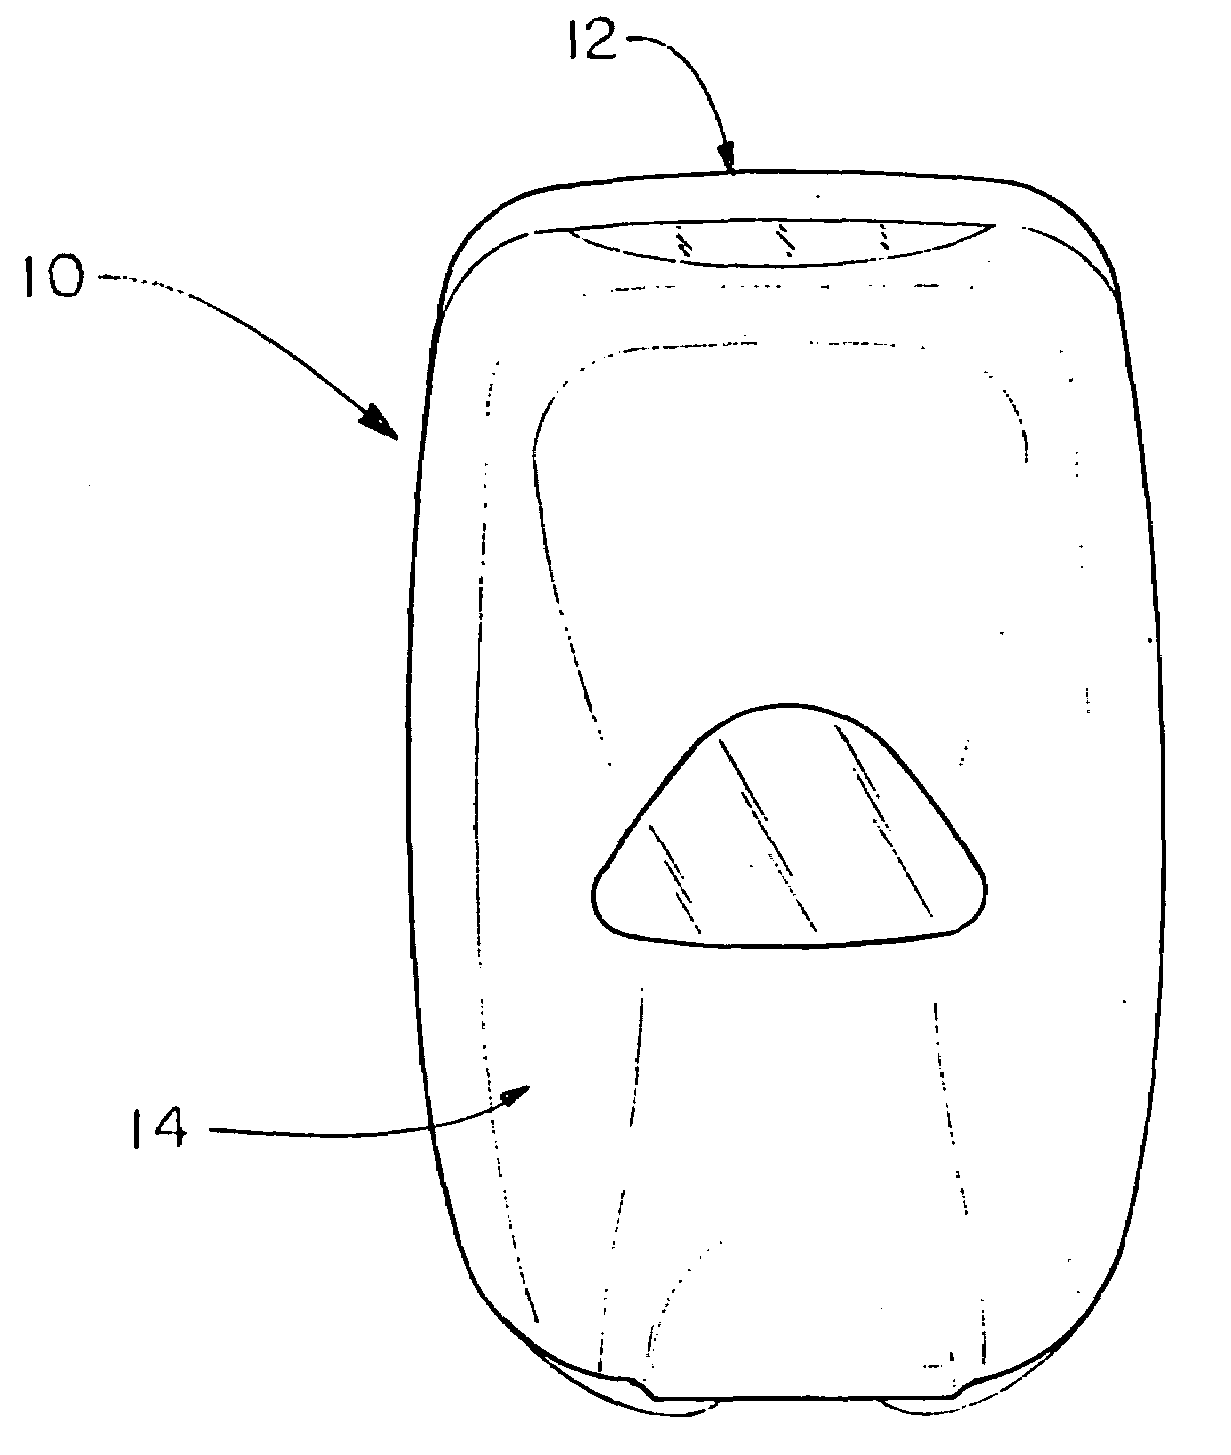 Cover release mechanism for a dispenser